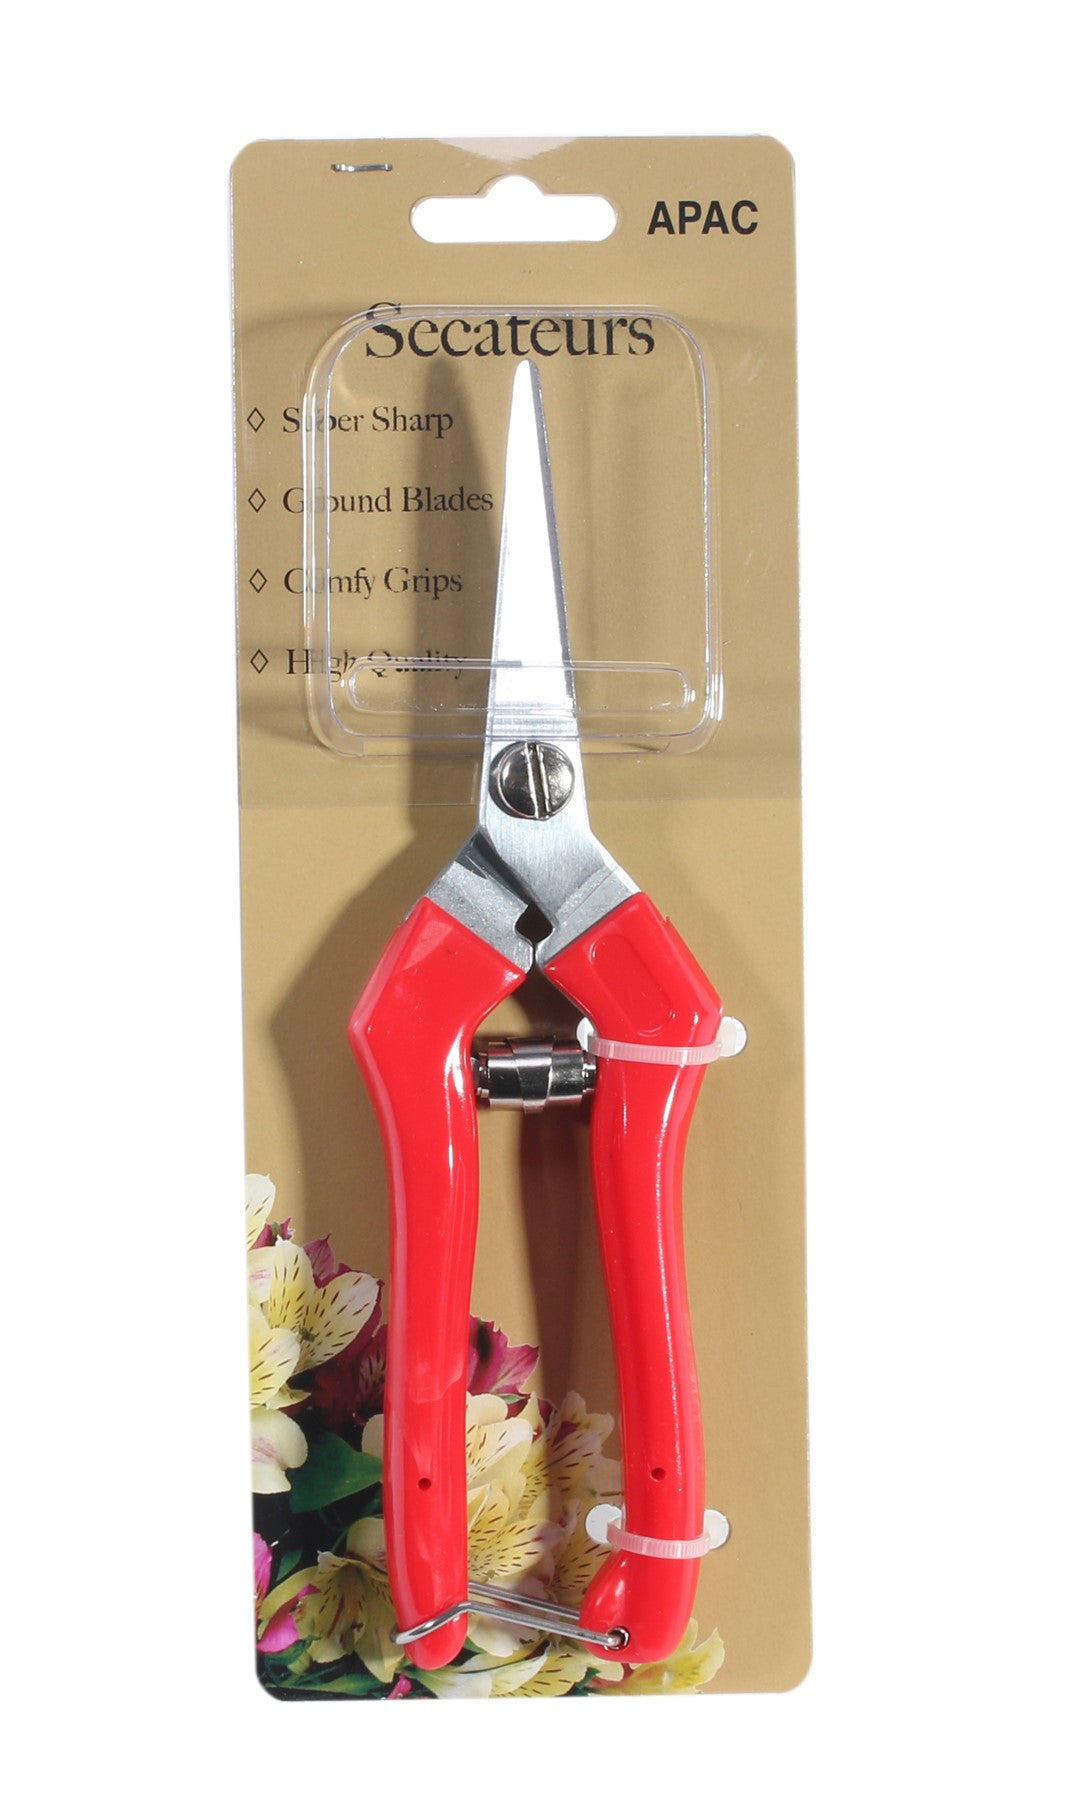 View Red Handle Secateurs information